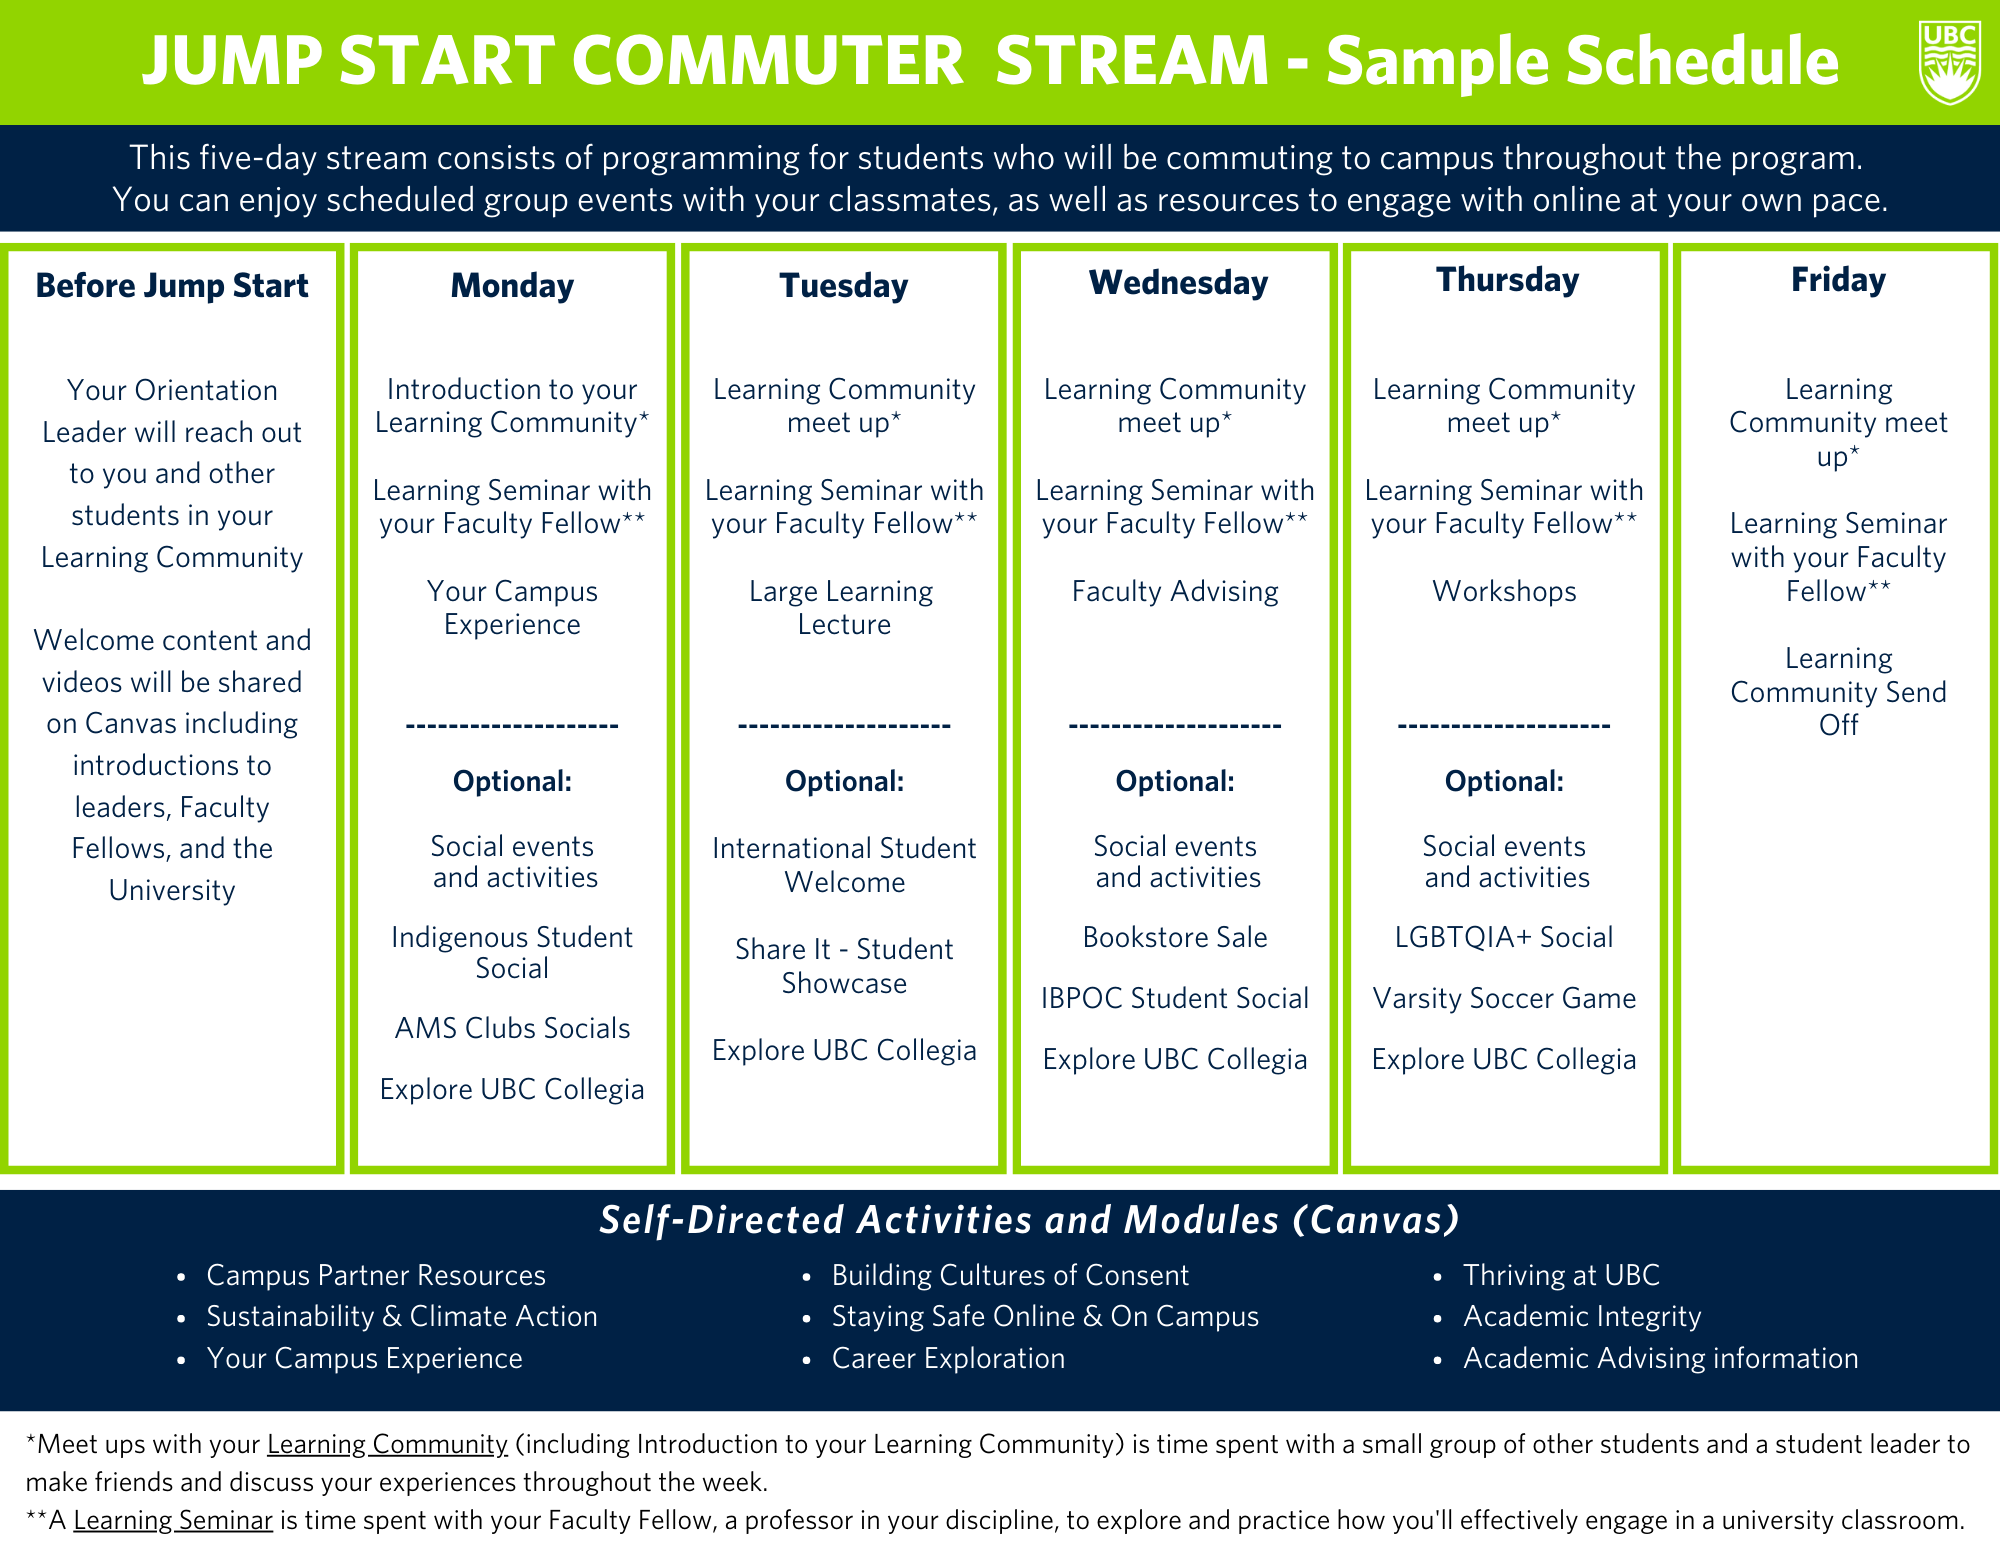 Sample Jump Start Vancouver schedule for students commuting to campus